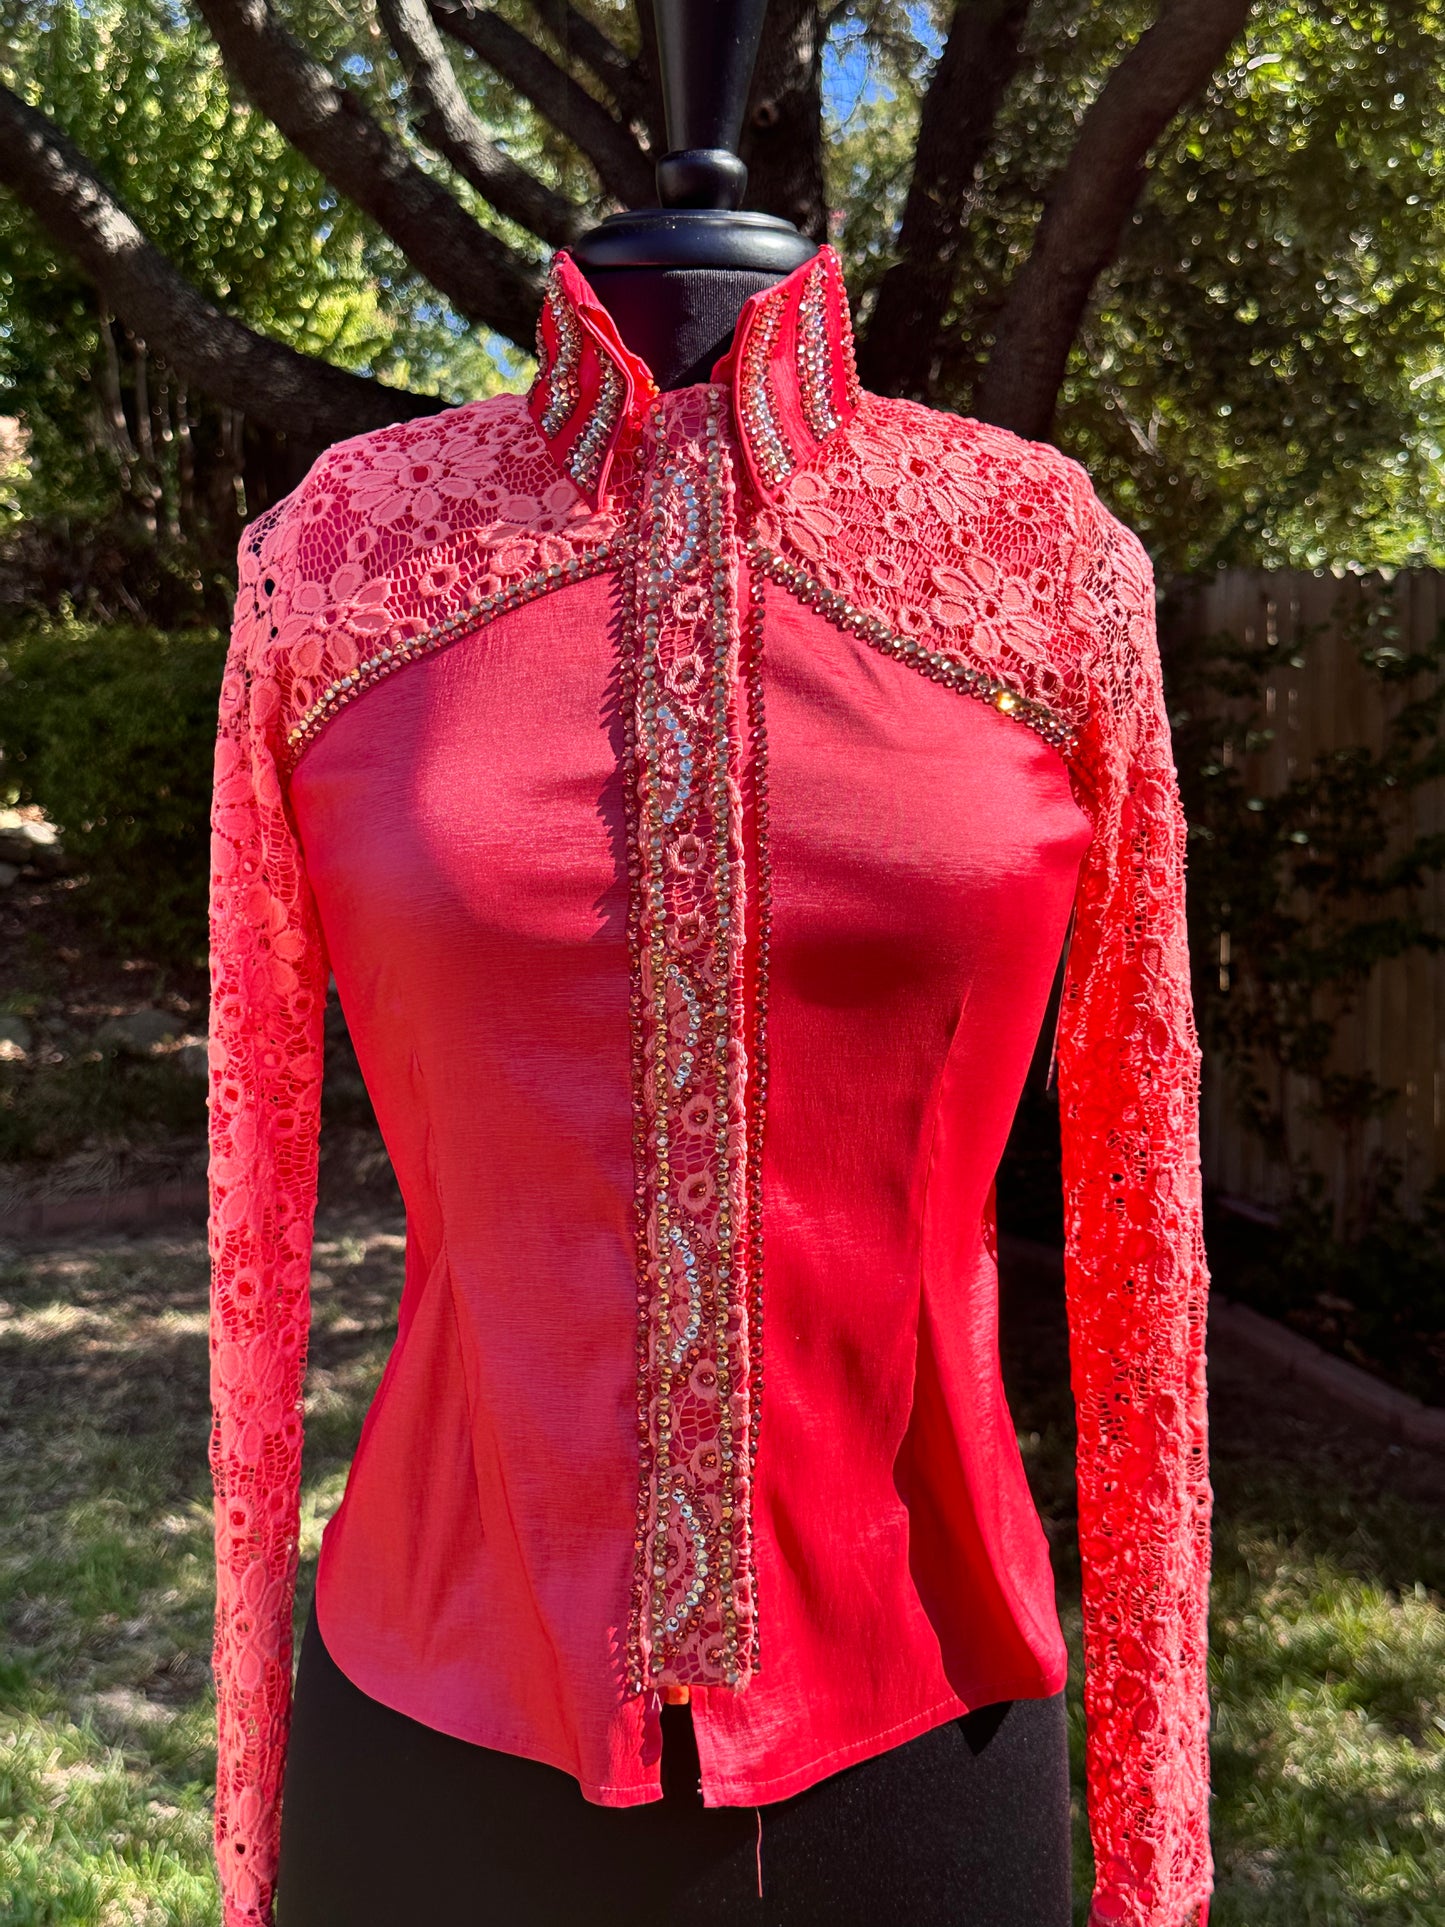 Size small day shirt. Hidden zipper with coral lace retro look with full lace sleeves.